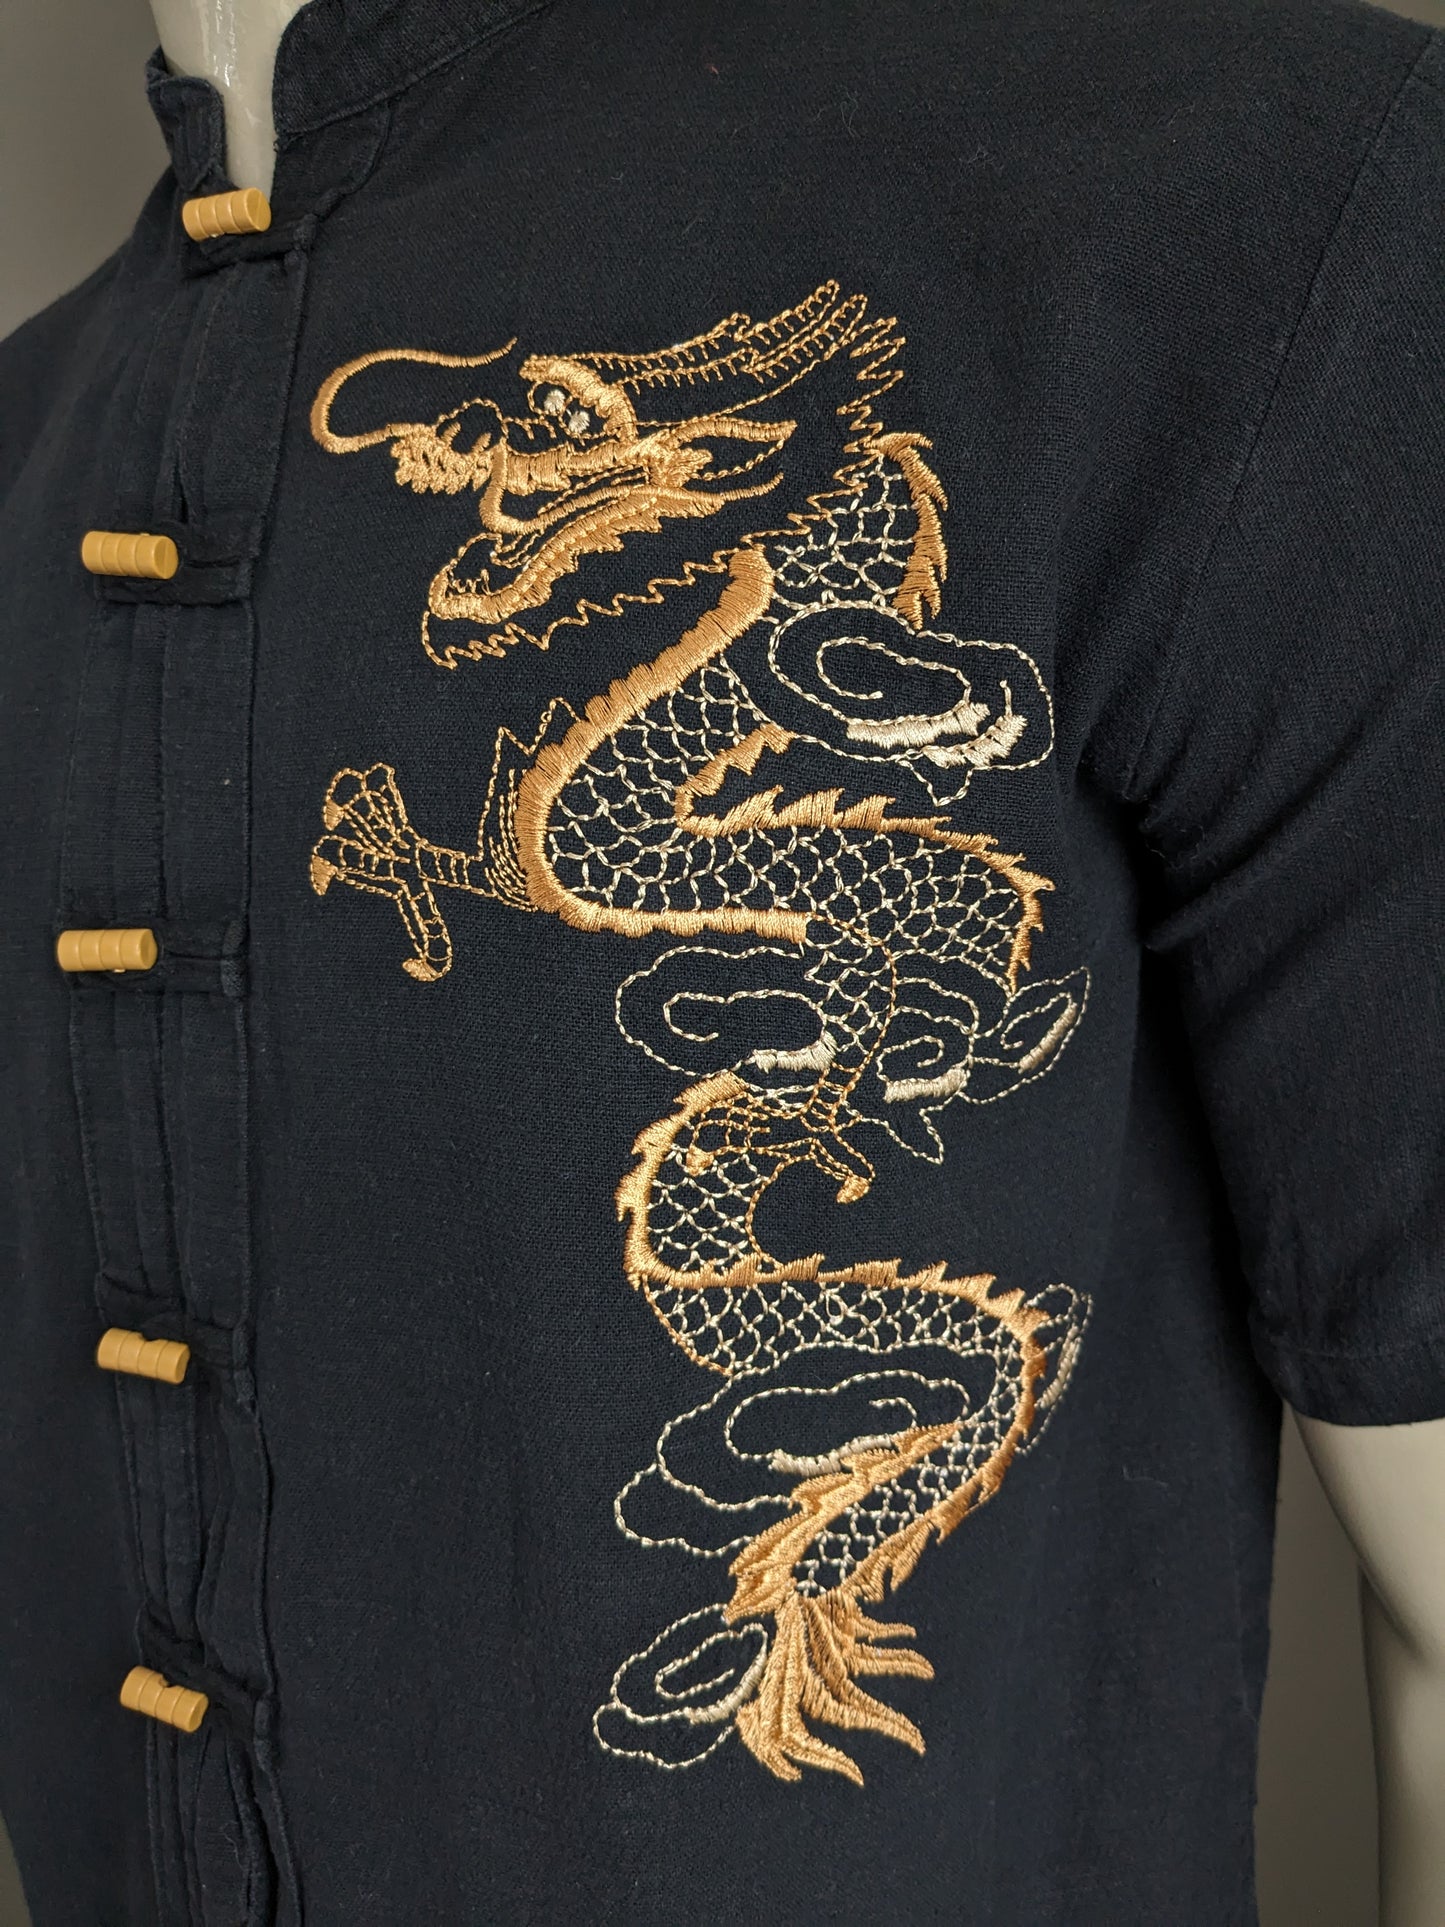 Vintage Razia shirt short sleeve with mao / farmer / raised collar. Black with embroidered dragon. Size L.